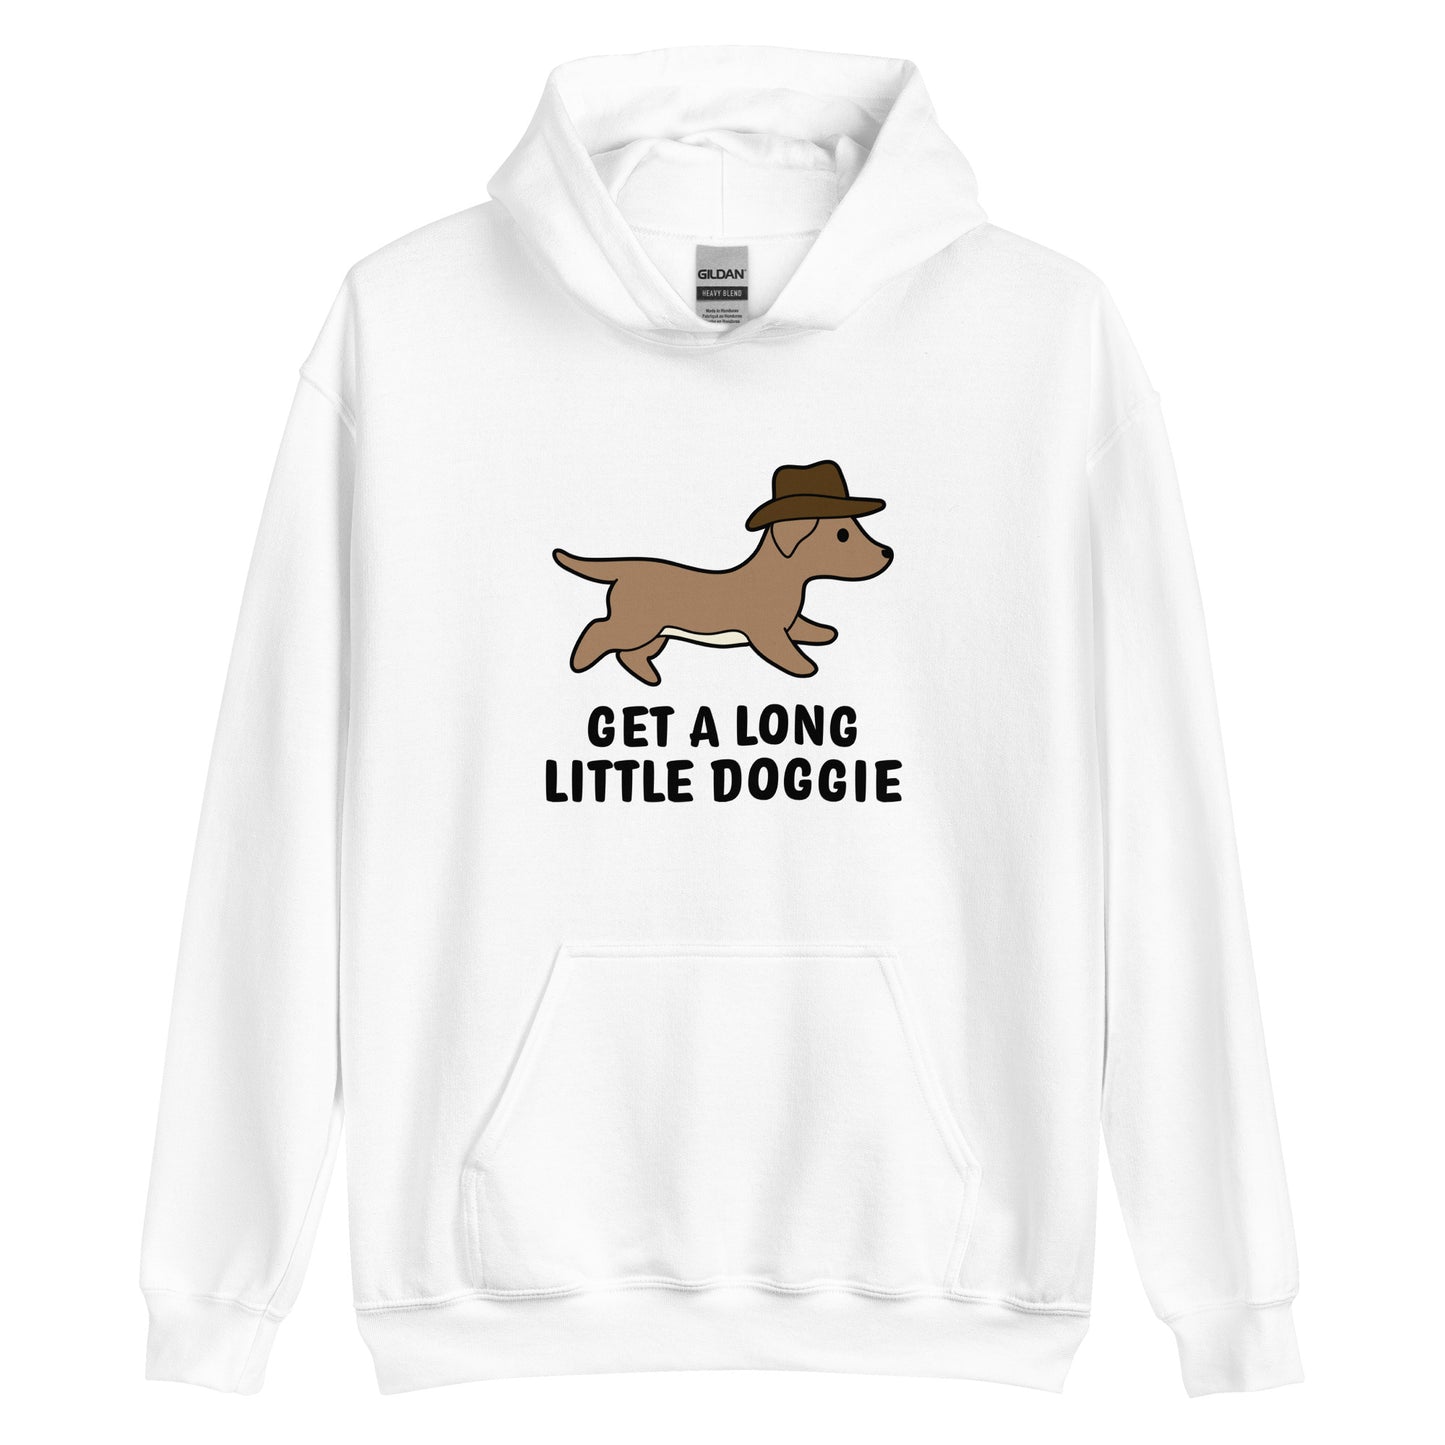 A white hooded sweatshirt featuring an image of a dachshund wearing a cowboy hat. Text below the dog reads "Get a long little doggie"